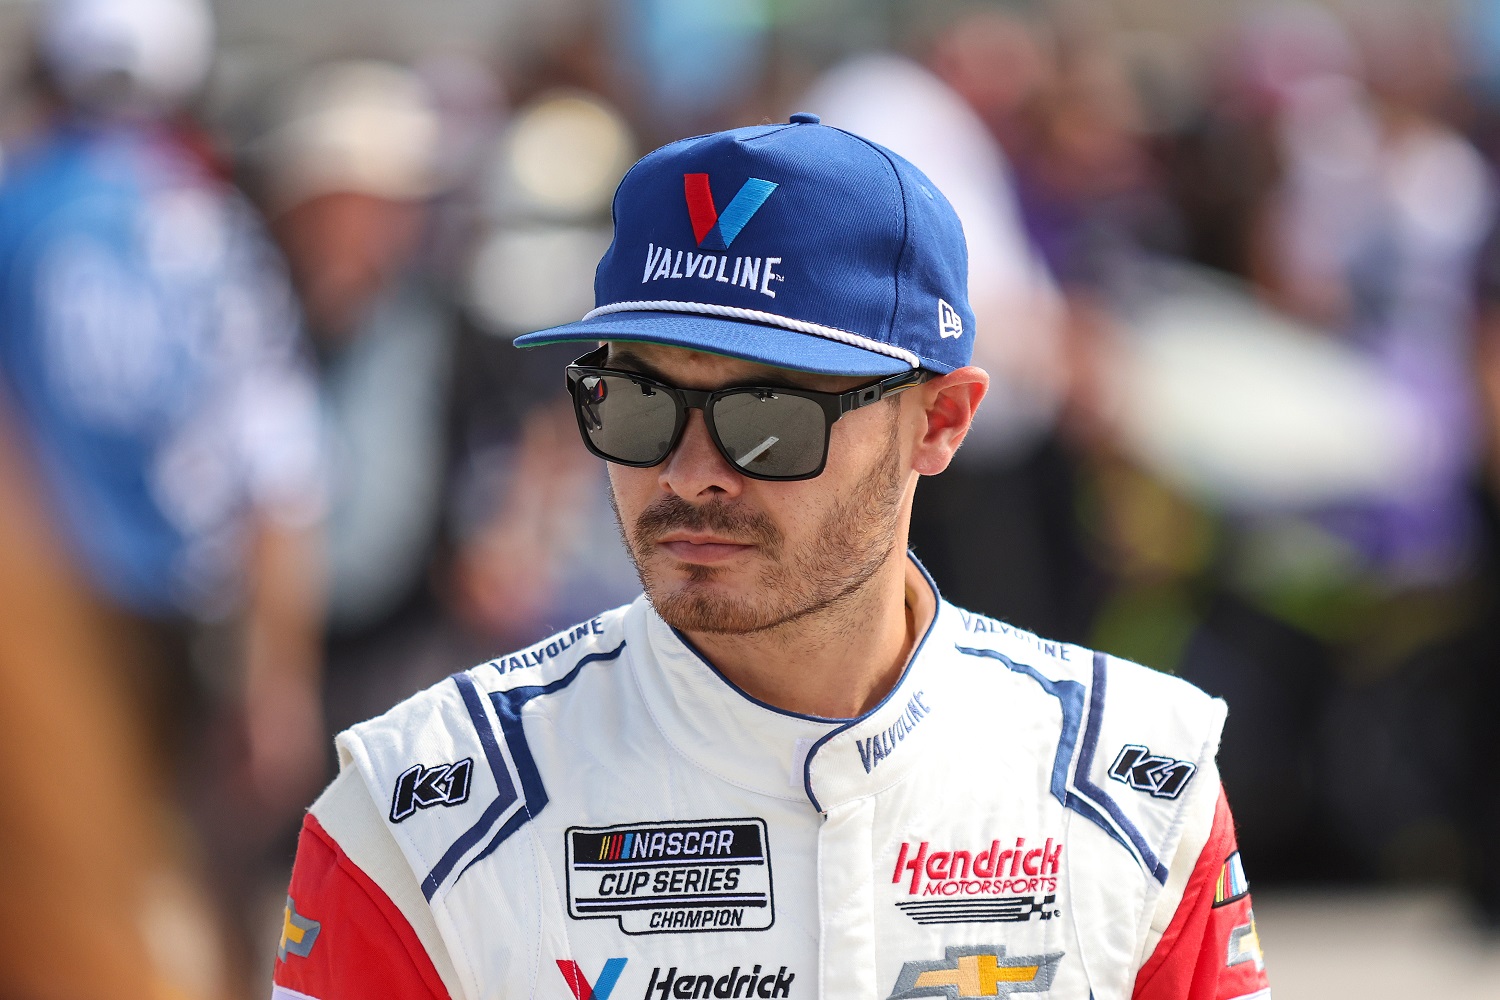 Kyle Larson’s Latest Brush With Controversy Didn’t Faze Martin Truex Jr. Like It Triggered Bubba Wallace